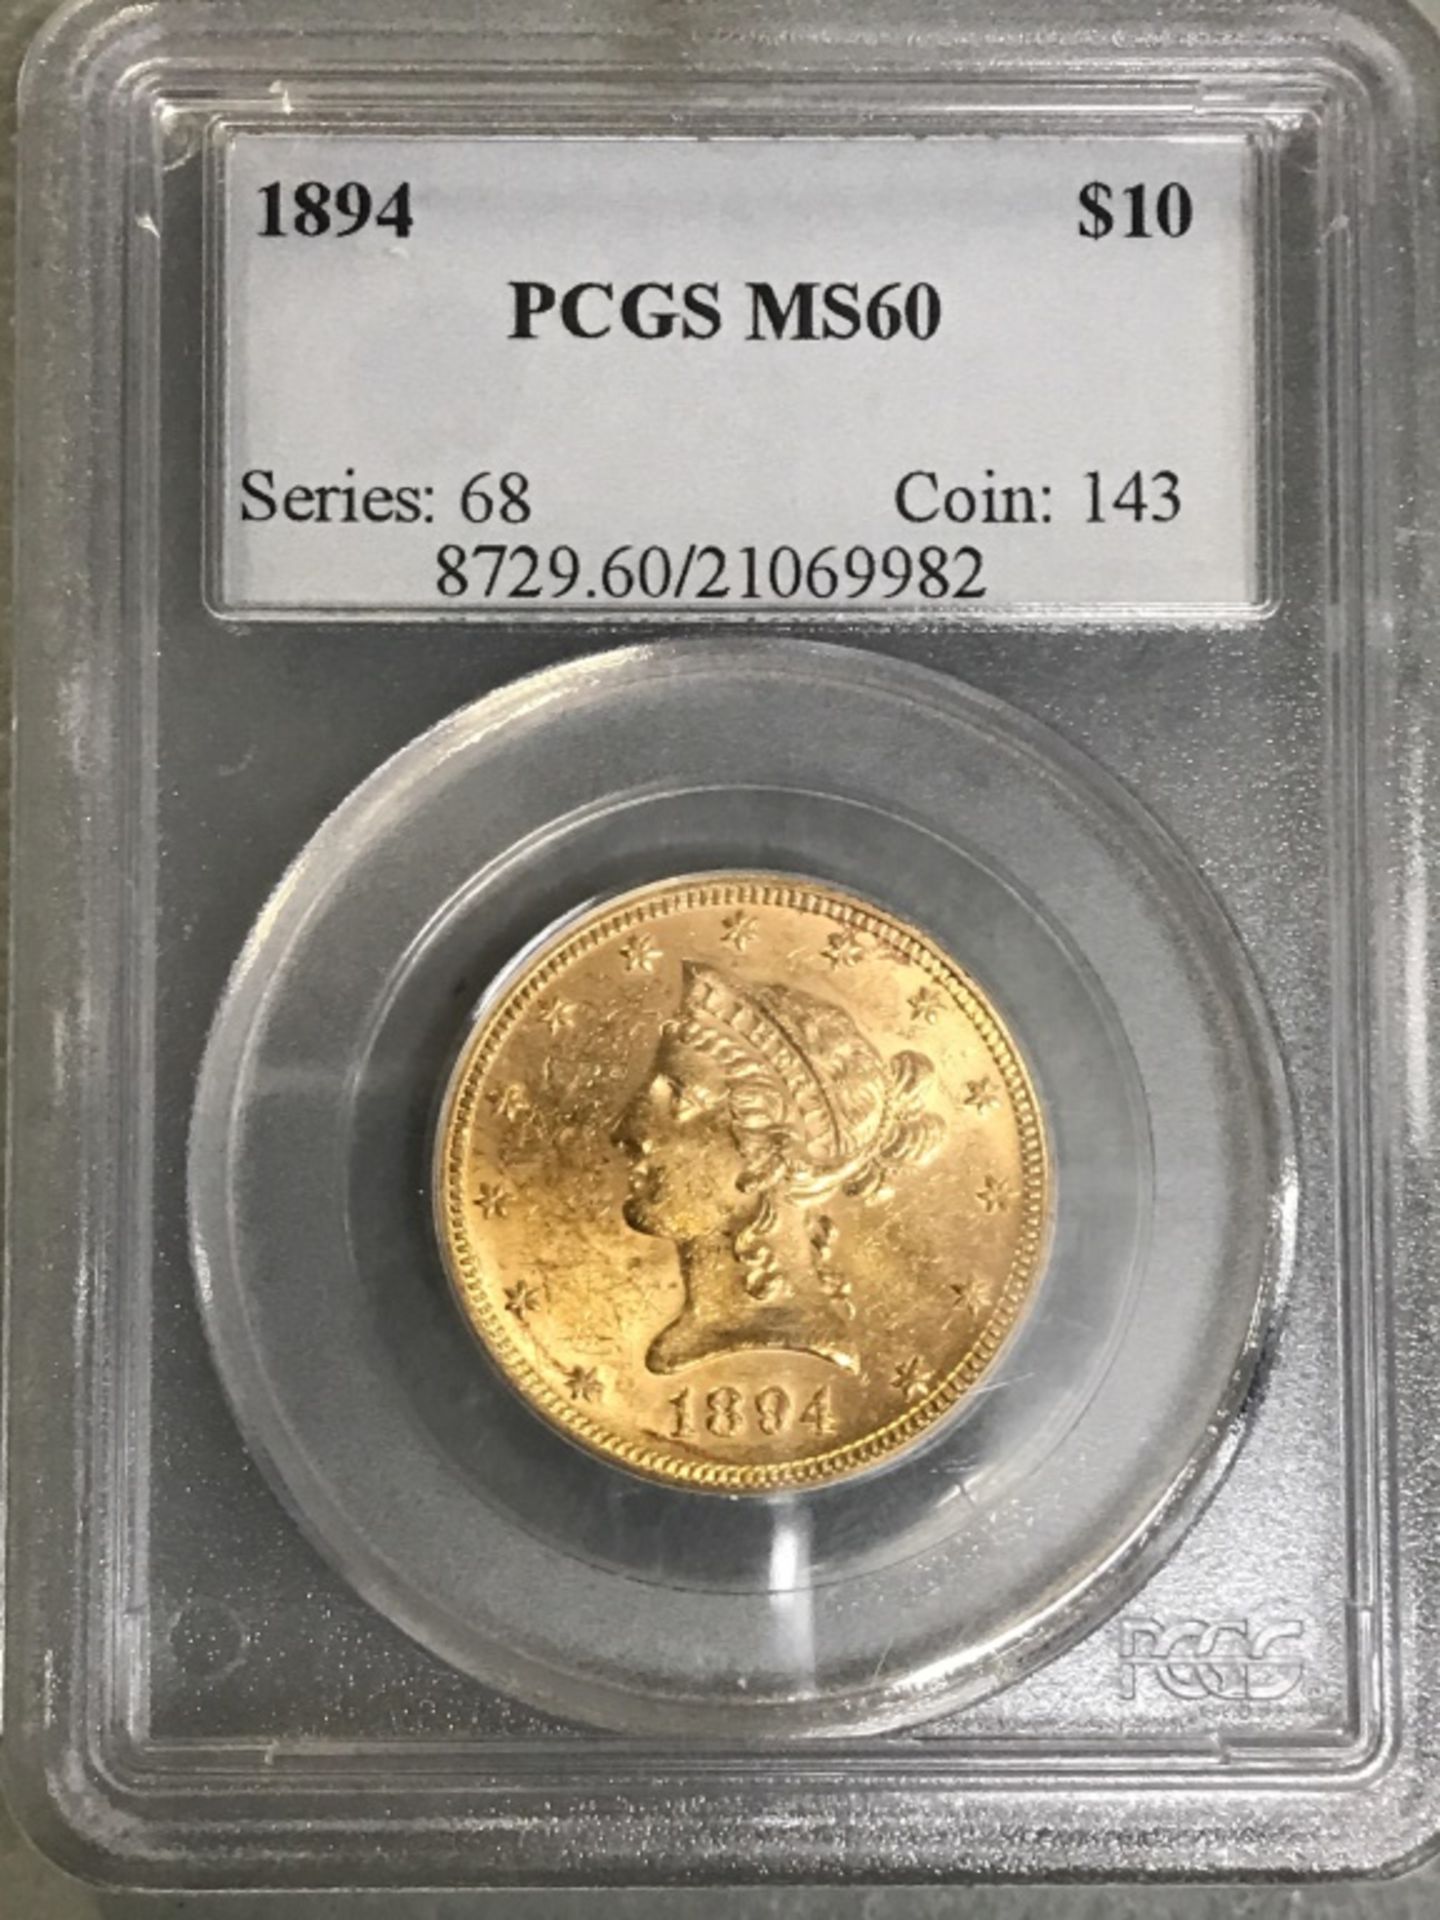 $10 US Gold MS 60 1894 - Image 2 of 9